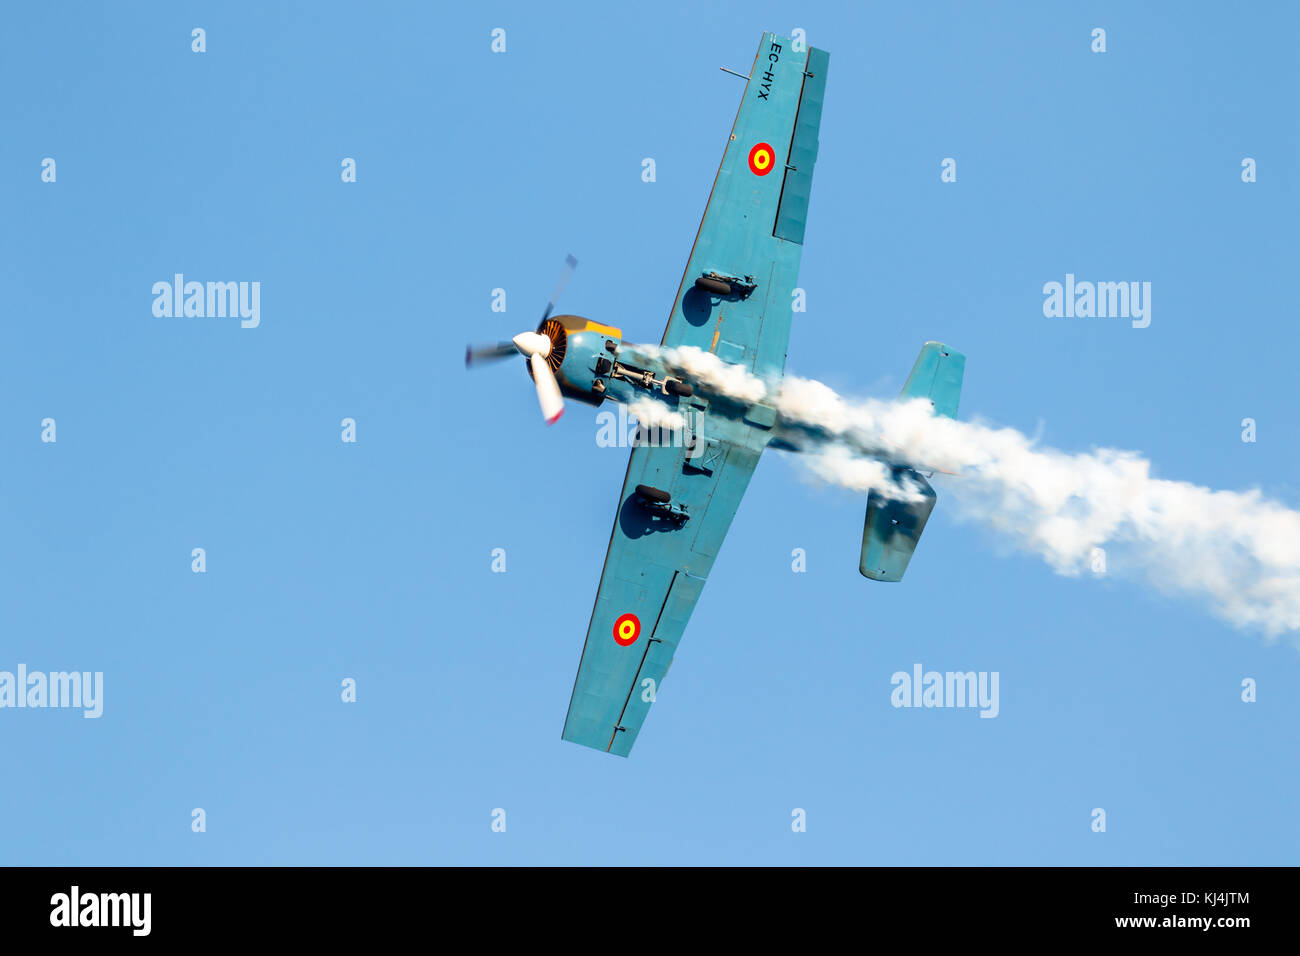 TORRE DEL MAR, MALAGA, SPAIN-JUL 29: Aircraft Yakolev Yak-52 of Salva Ballesta taking part in a exhibition on the 2nd airshow of Torre del Mar on July Stock Photo